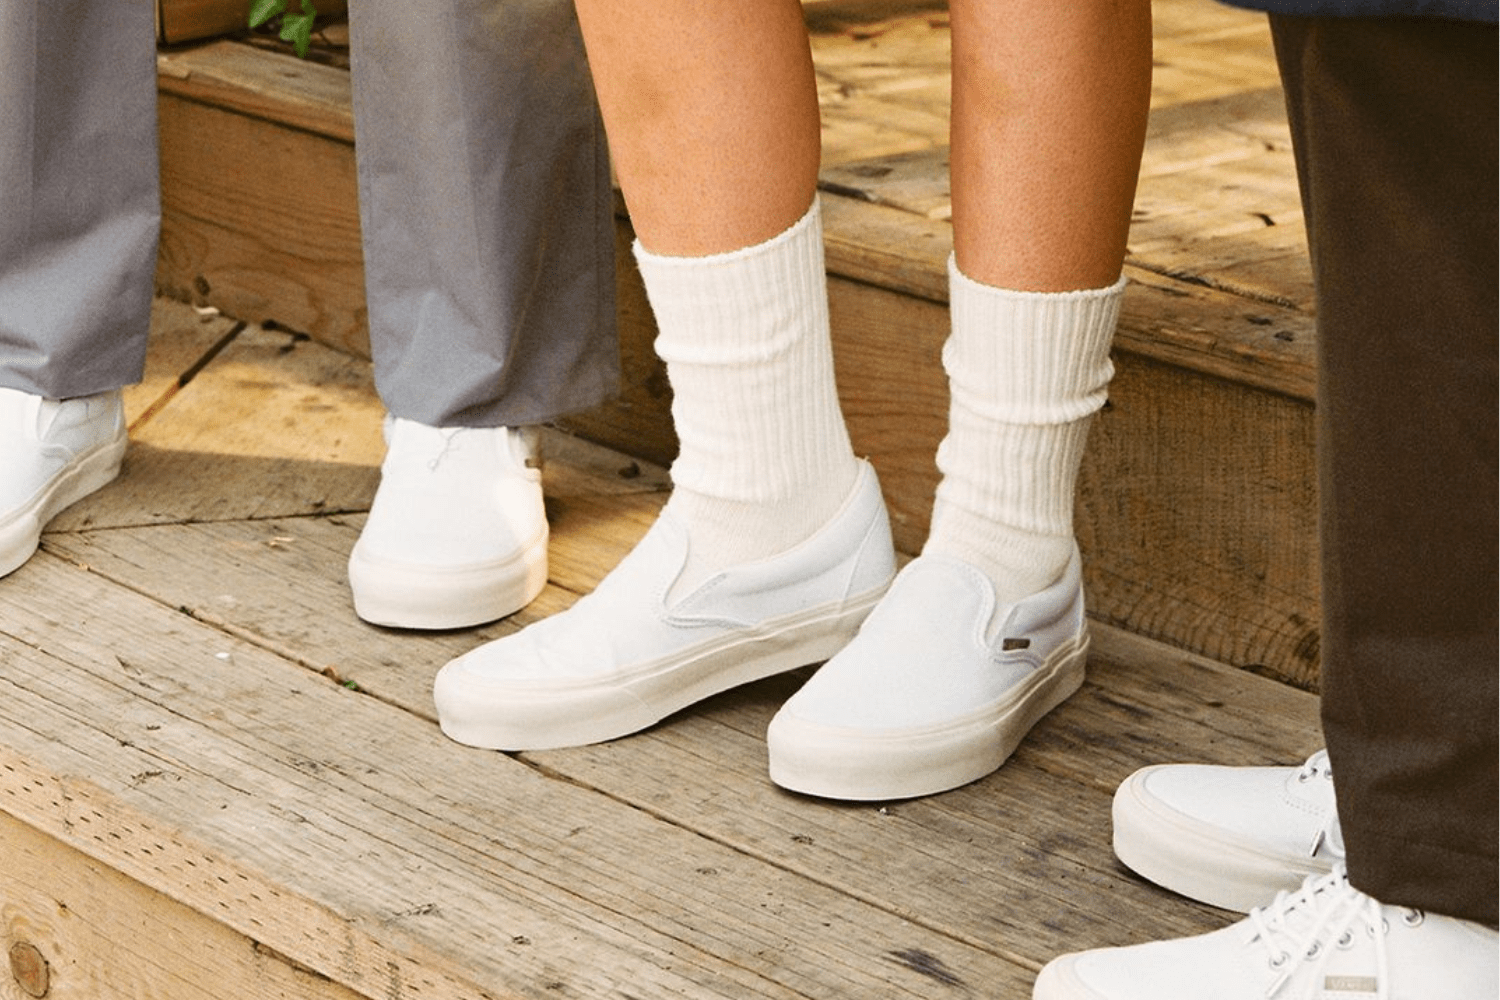 How to style sneaker socks?